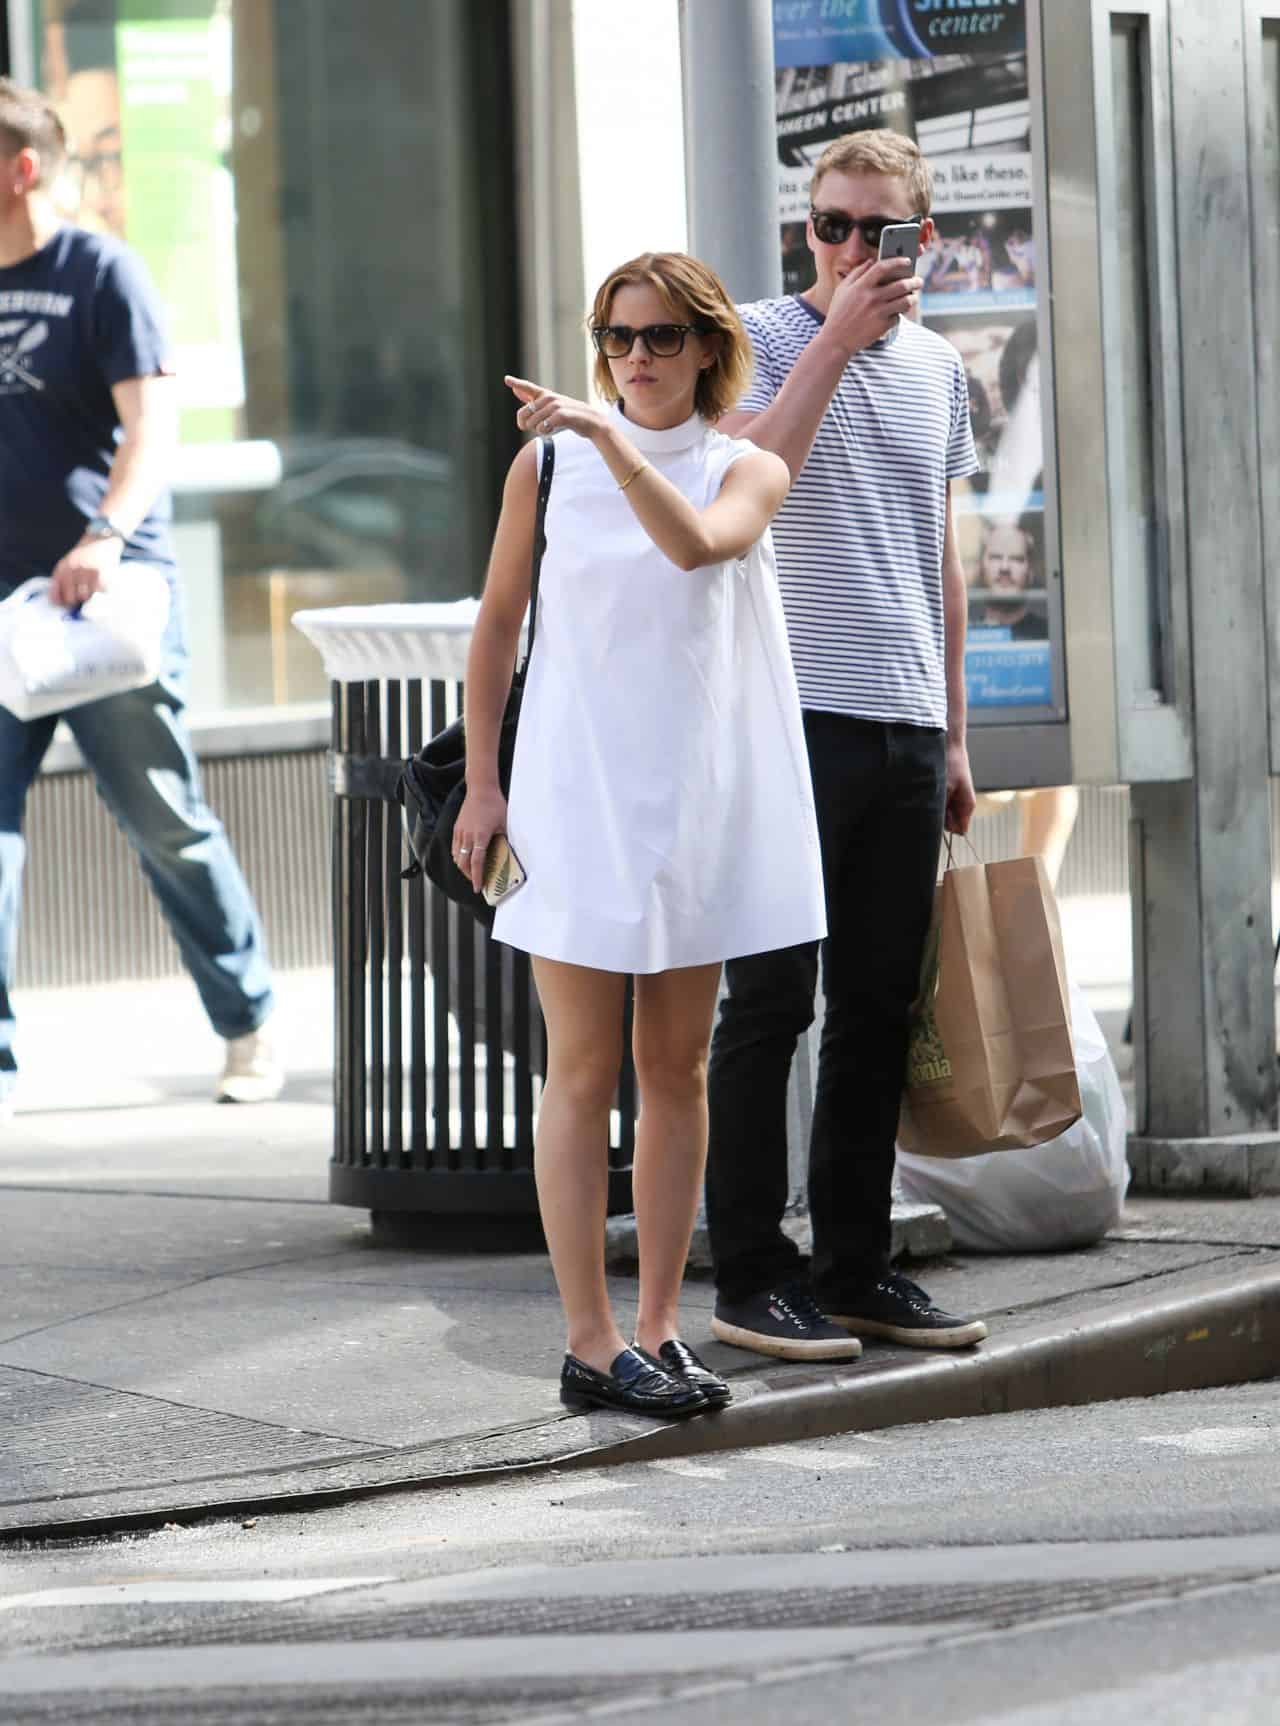 Emma Watson Shows Her Legs in a White Mini Dress as she Tours Shoe Stores